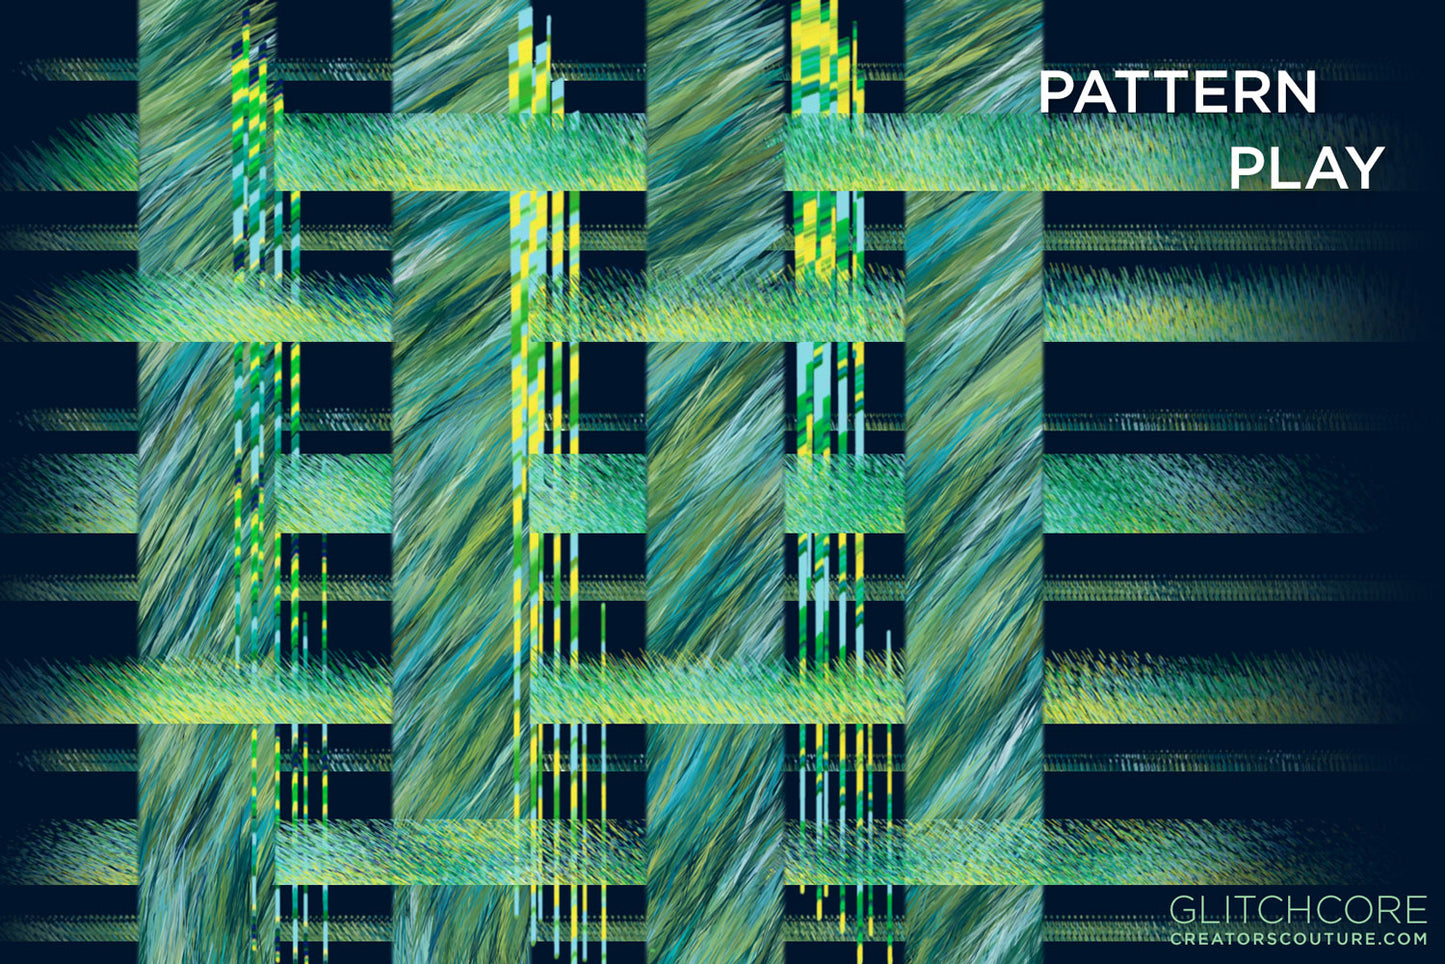 Plaid inspired pattern design created using multicolor, glitchy effect, Photoshop brushes, blue, green, and yellow color palette 